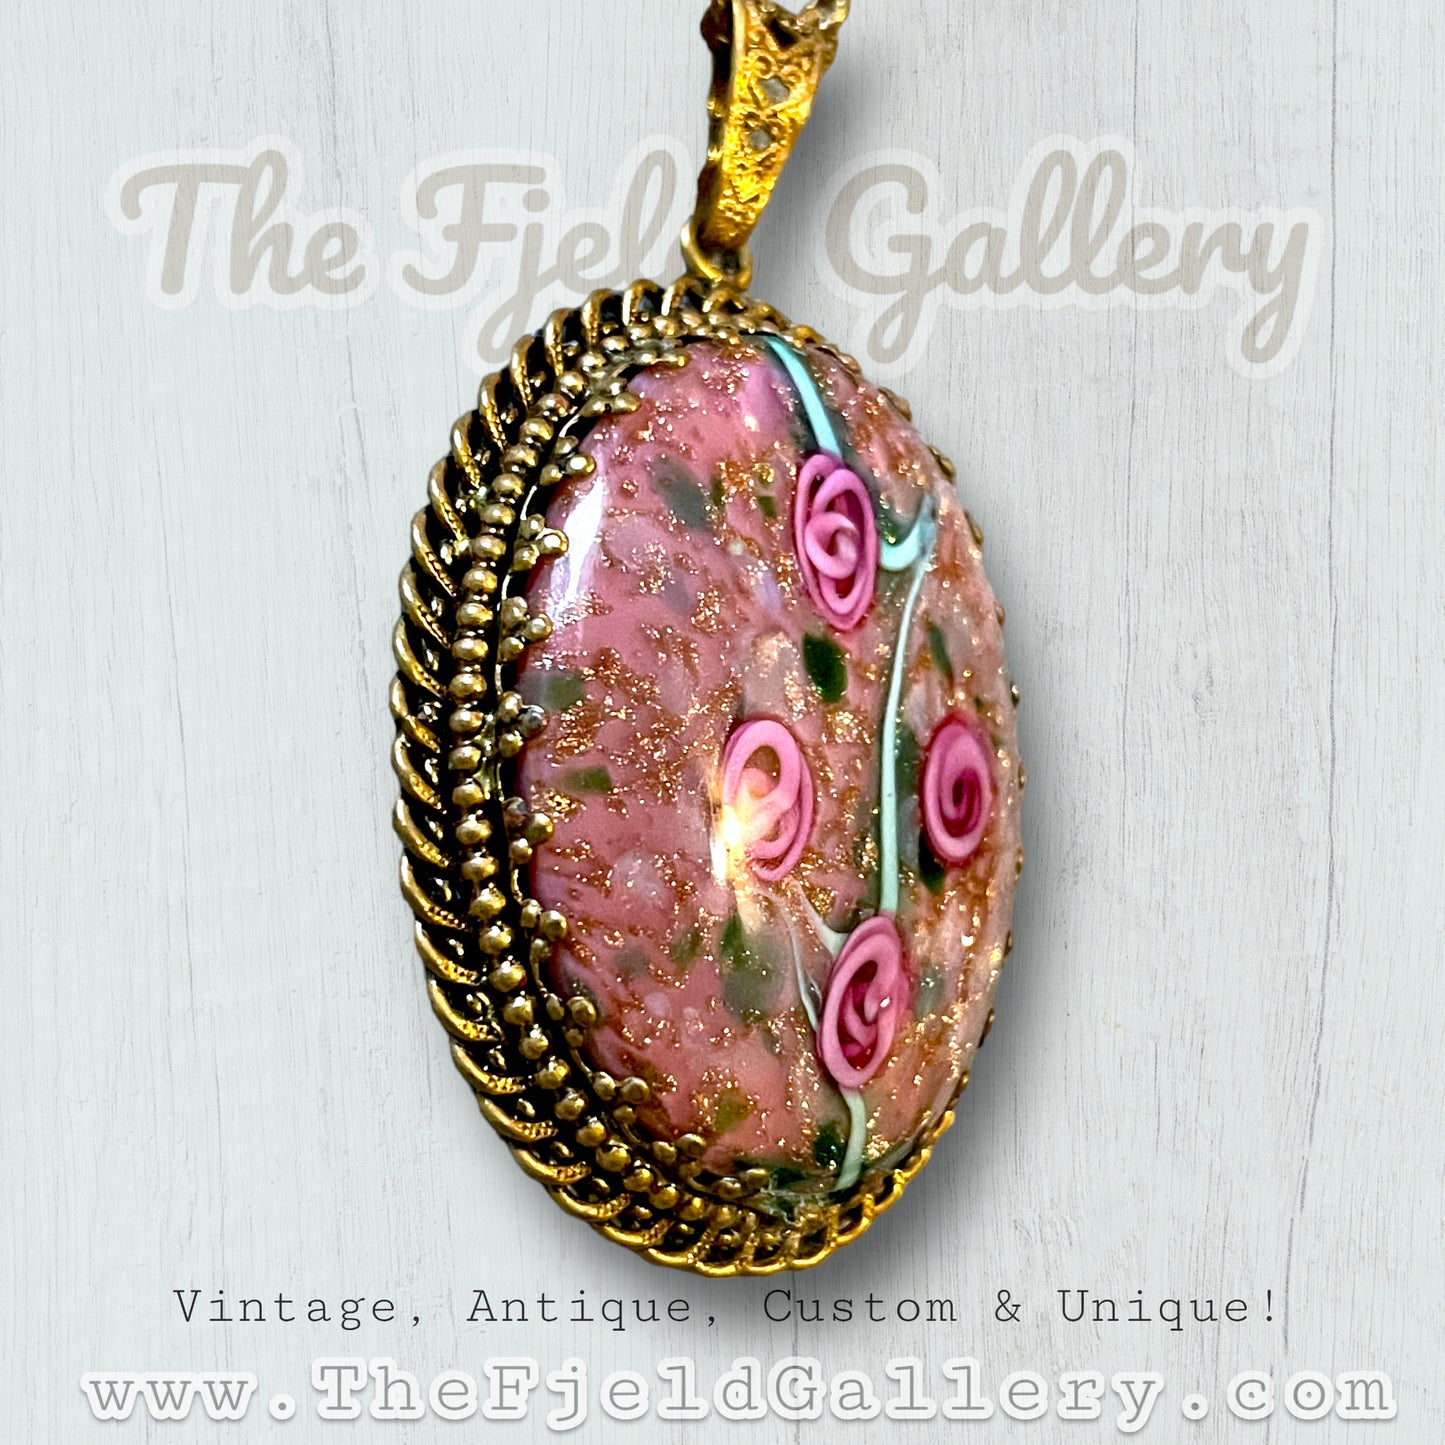 West German Purple & Gold Foil Rose Flower Art Glass Cabochon in Gilded Gold Brass Setting Necklace